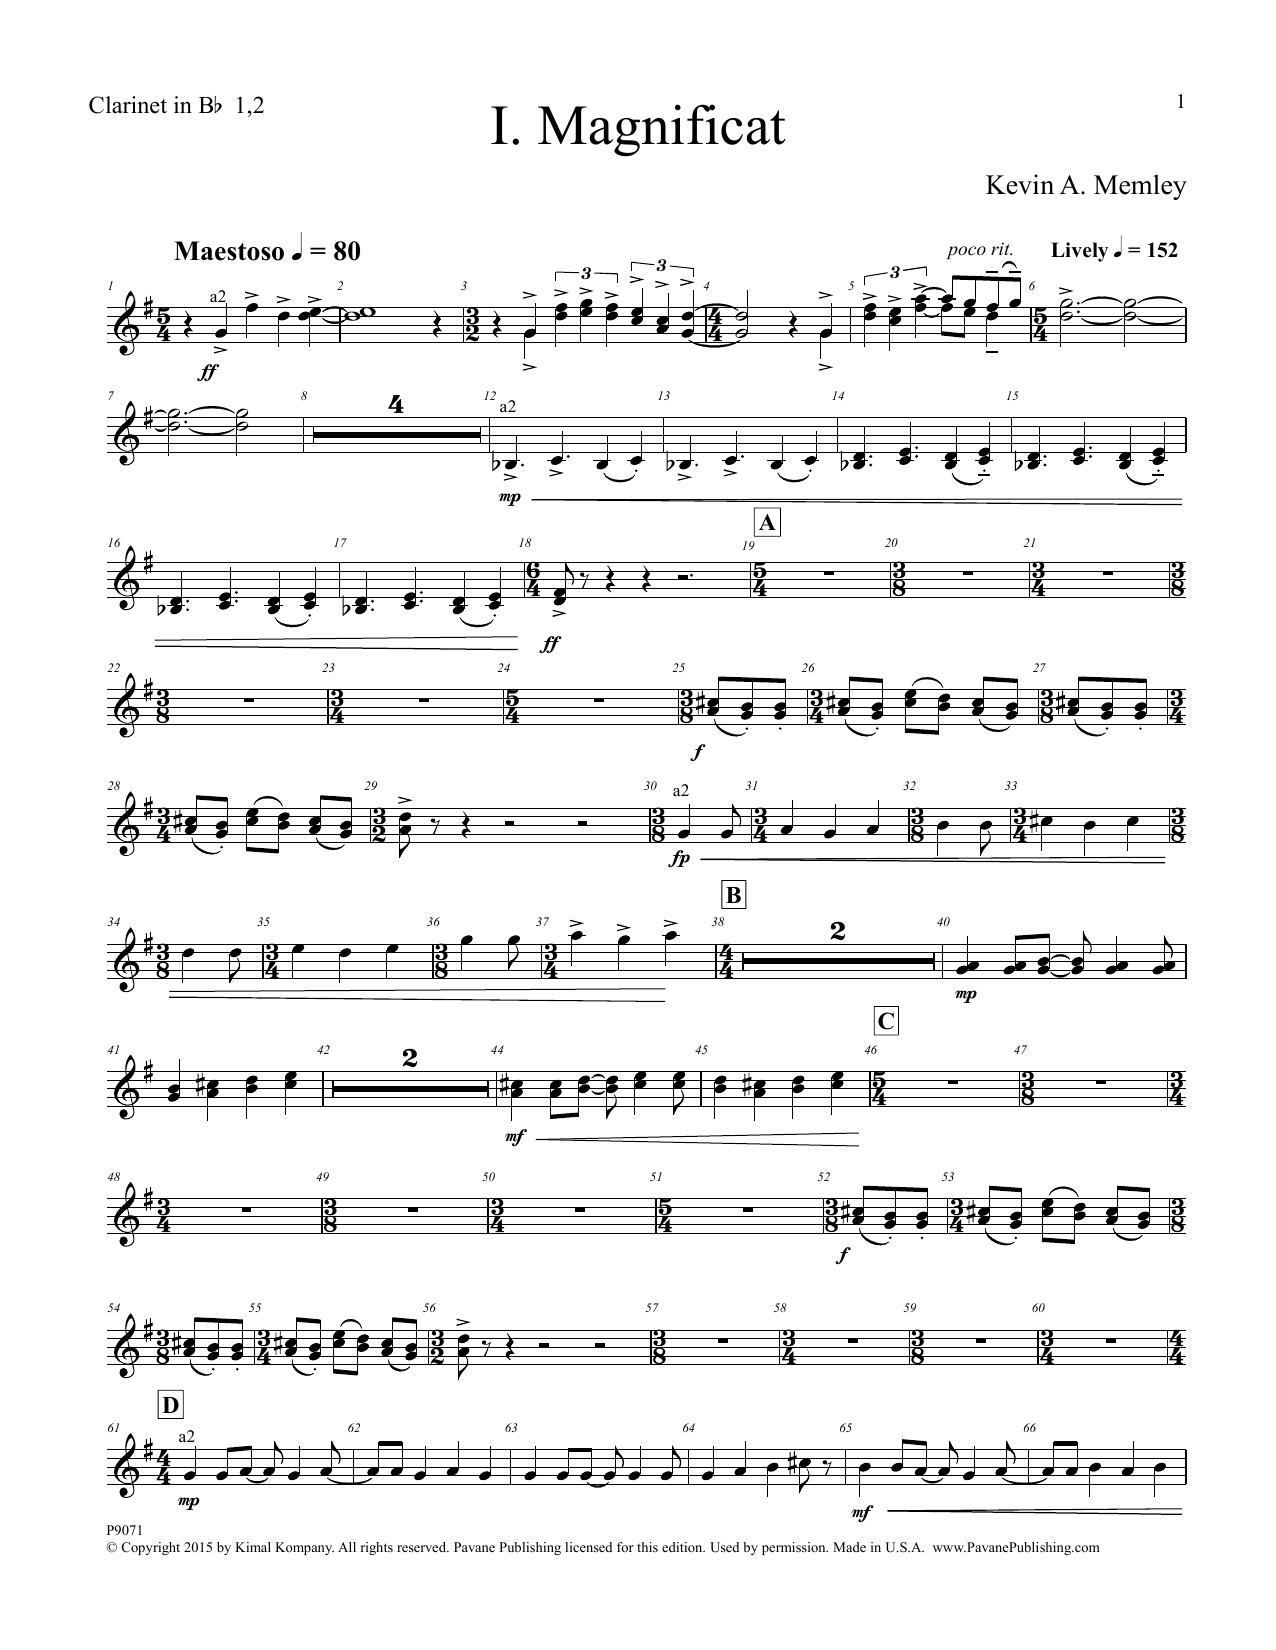 Download Kevin A. Memley Magnificat - Clarinet 1 & 2 Sheet Music